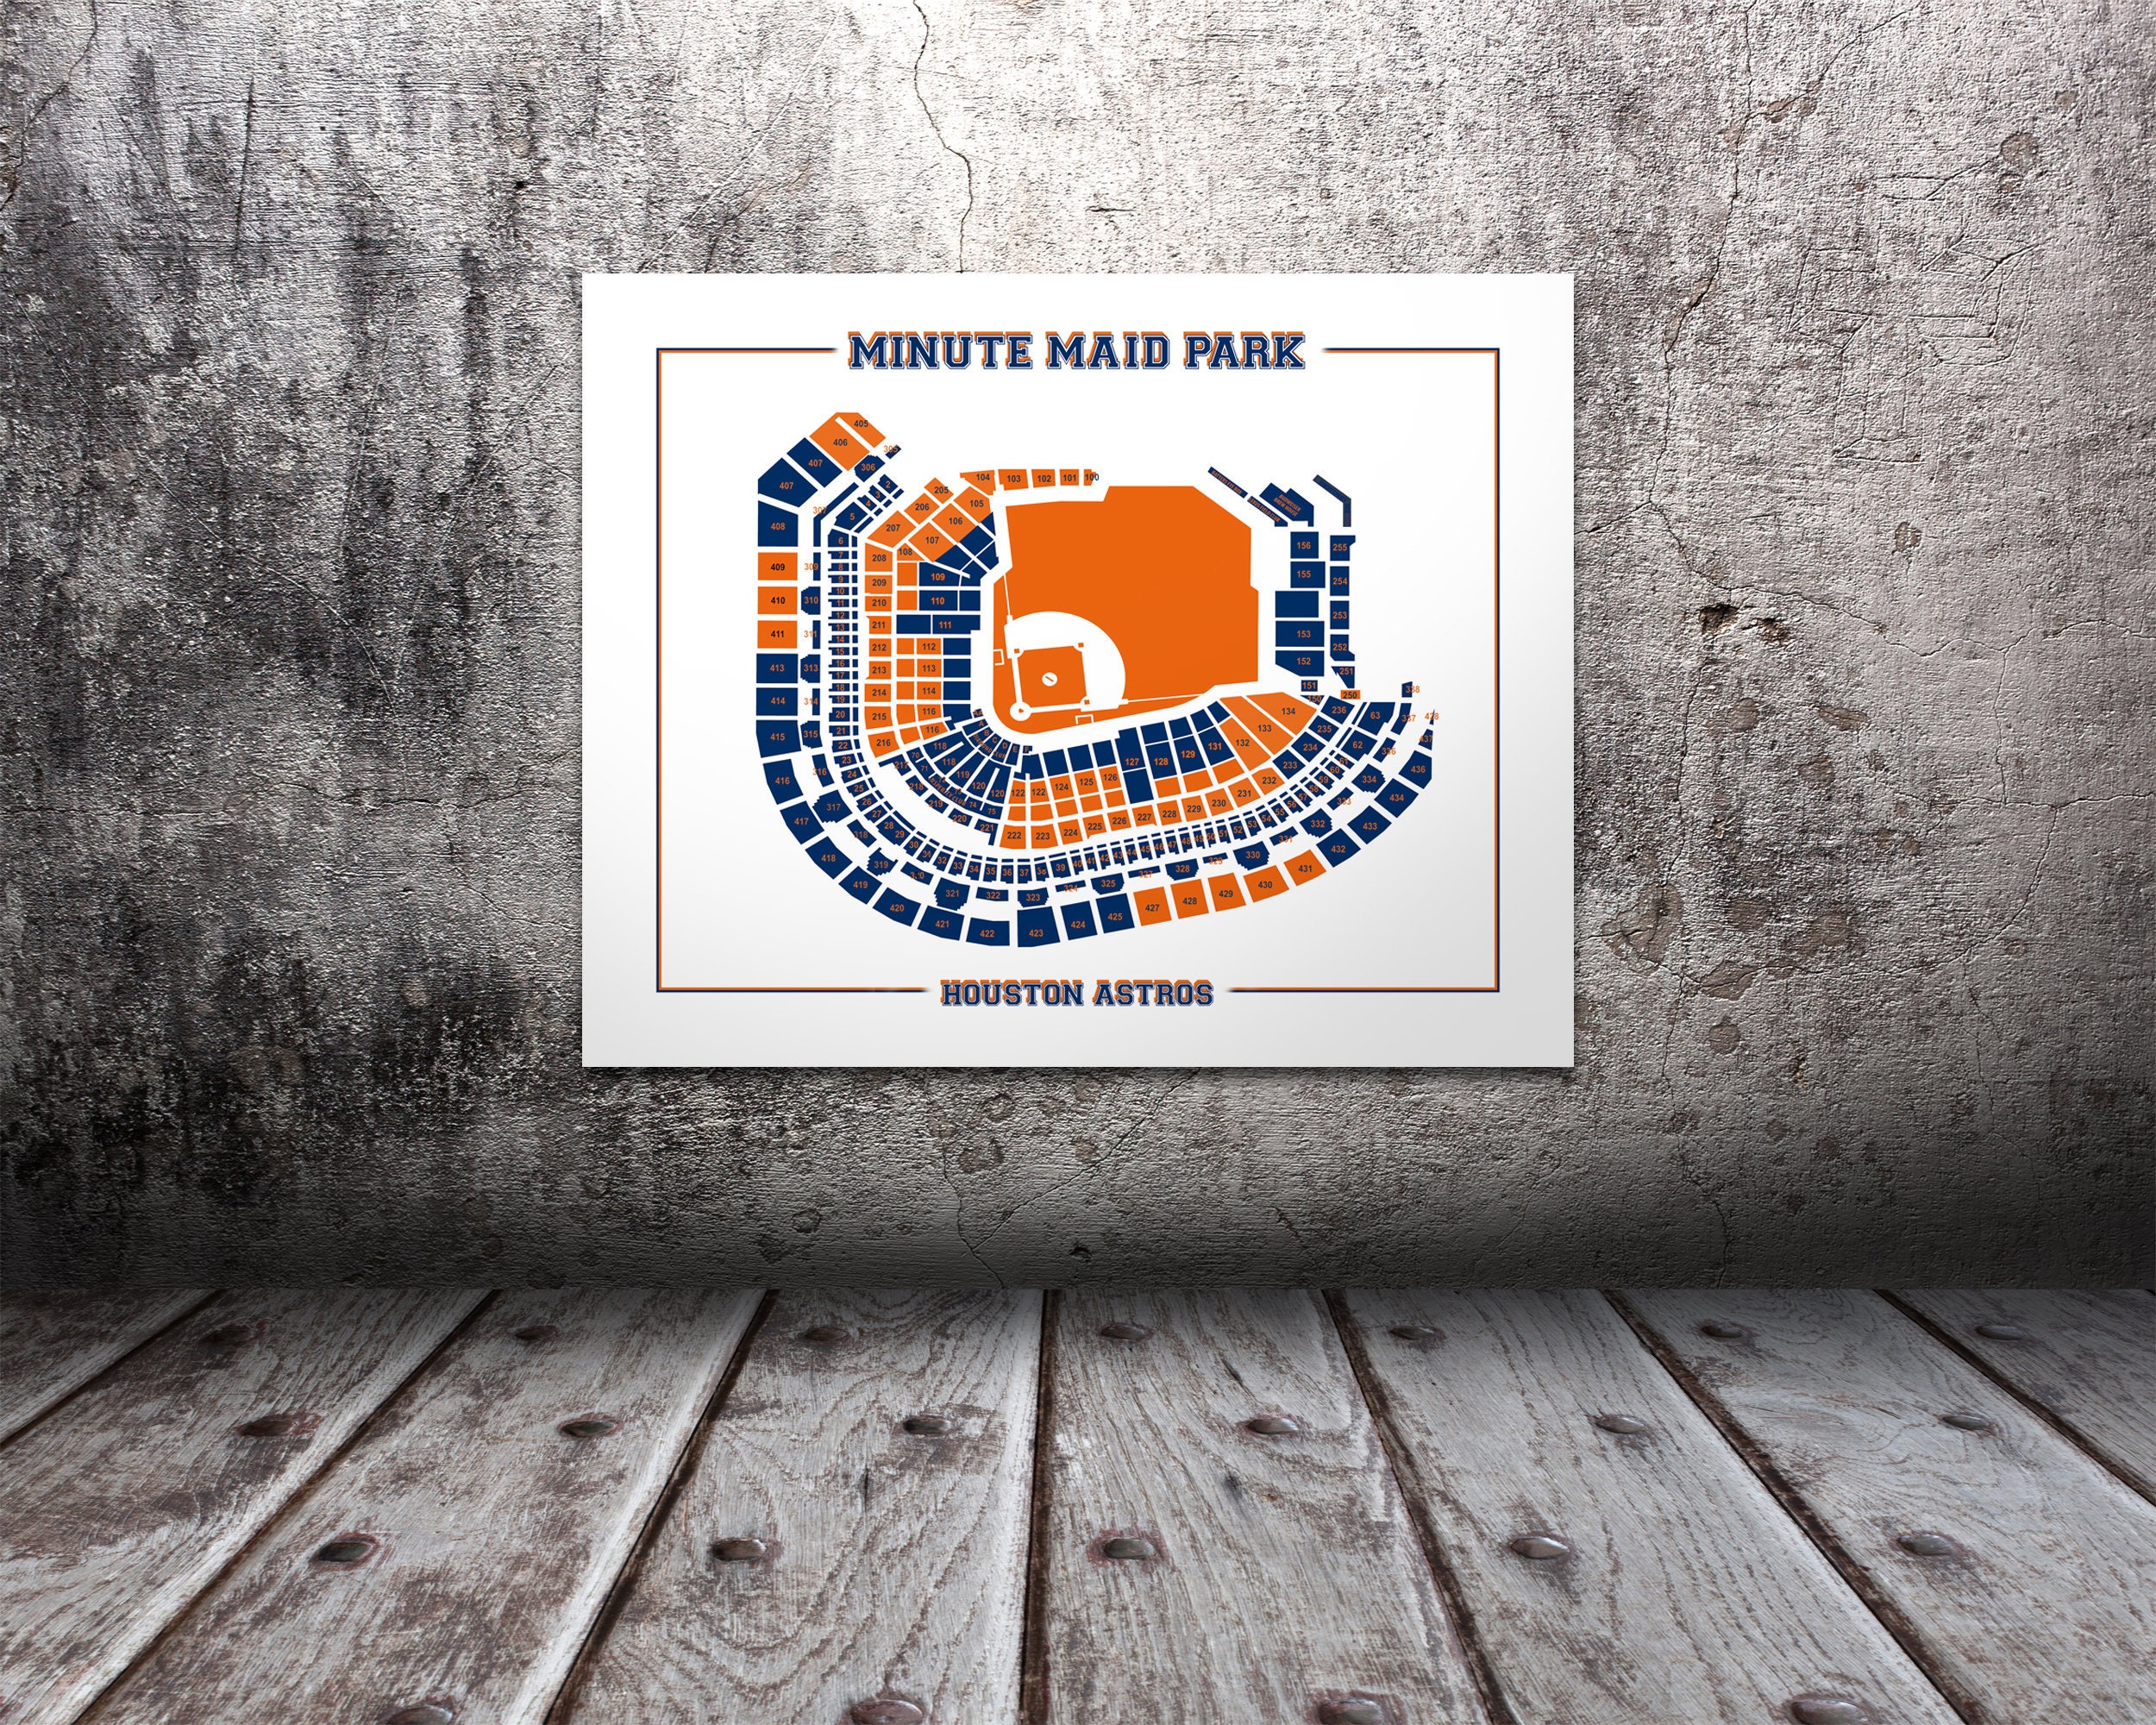 Minute Maid Park Seating Charts 